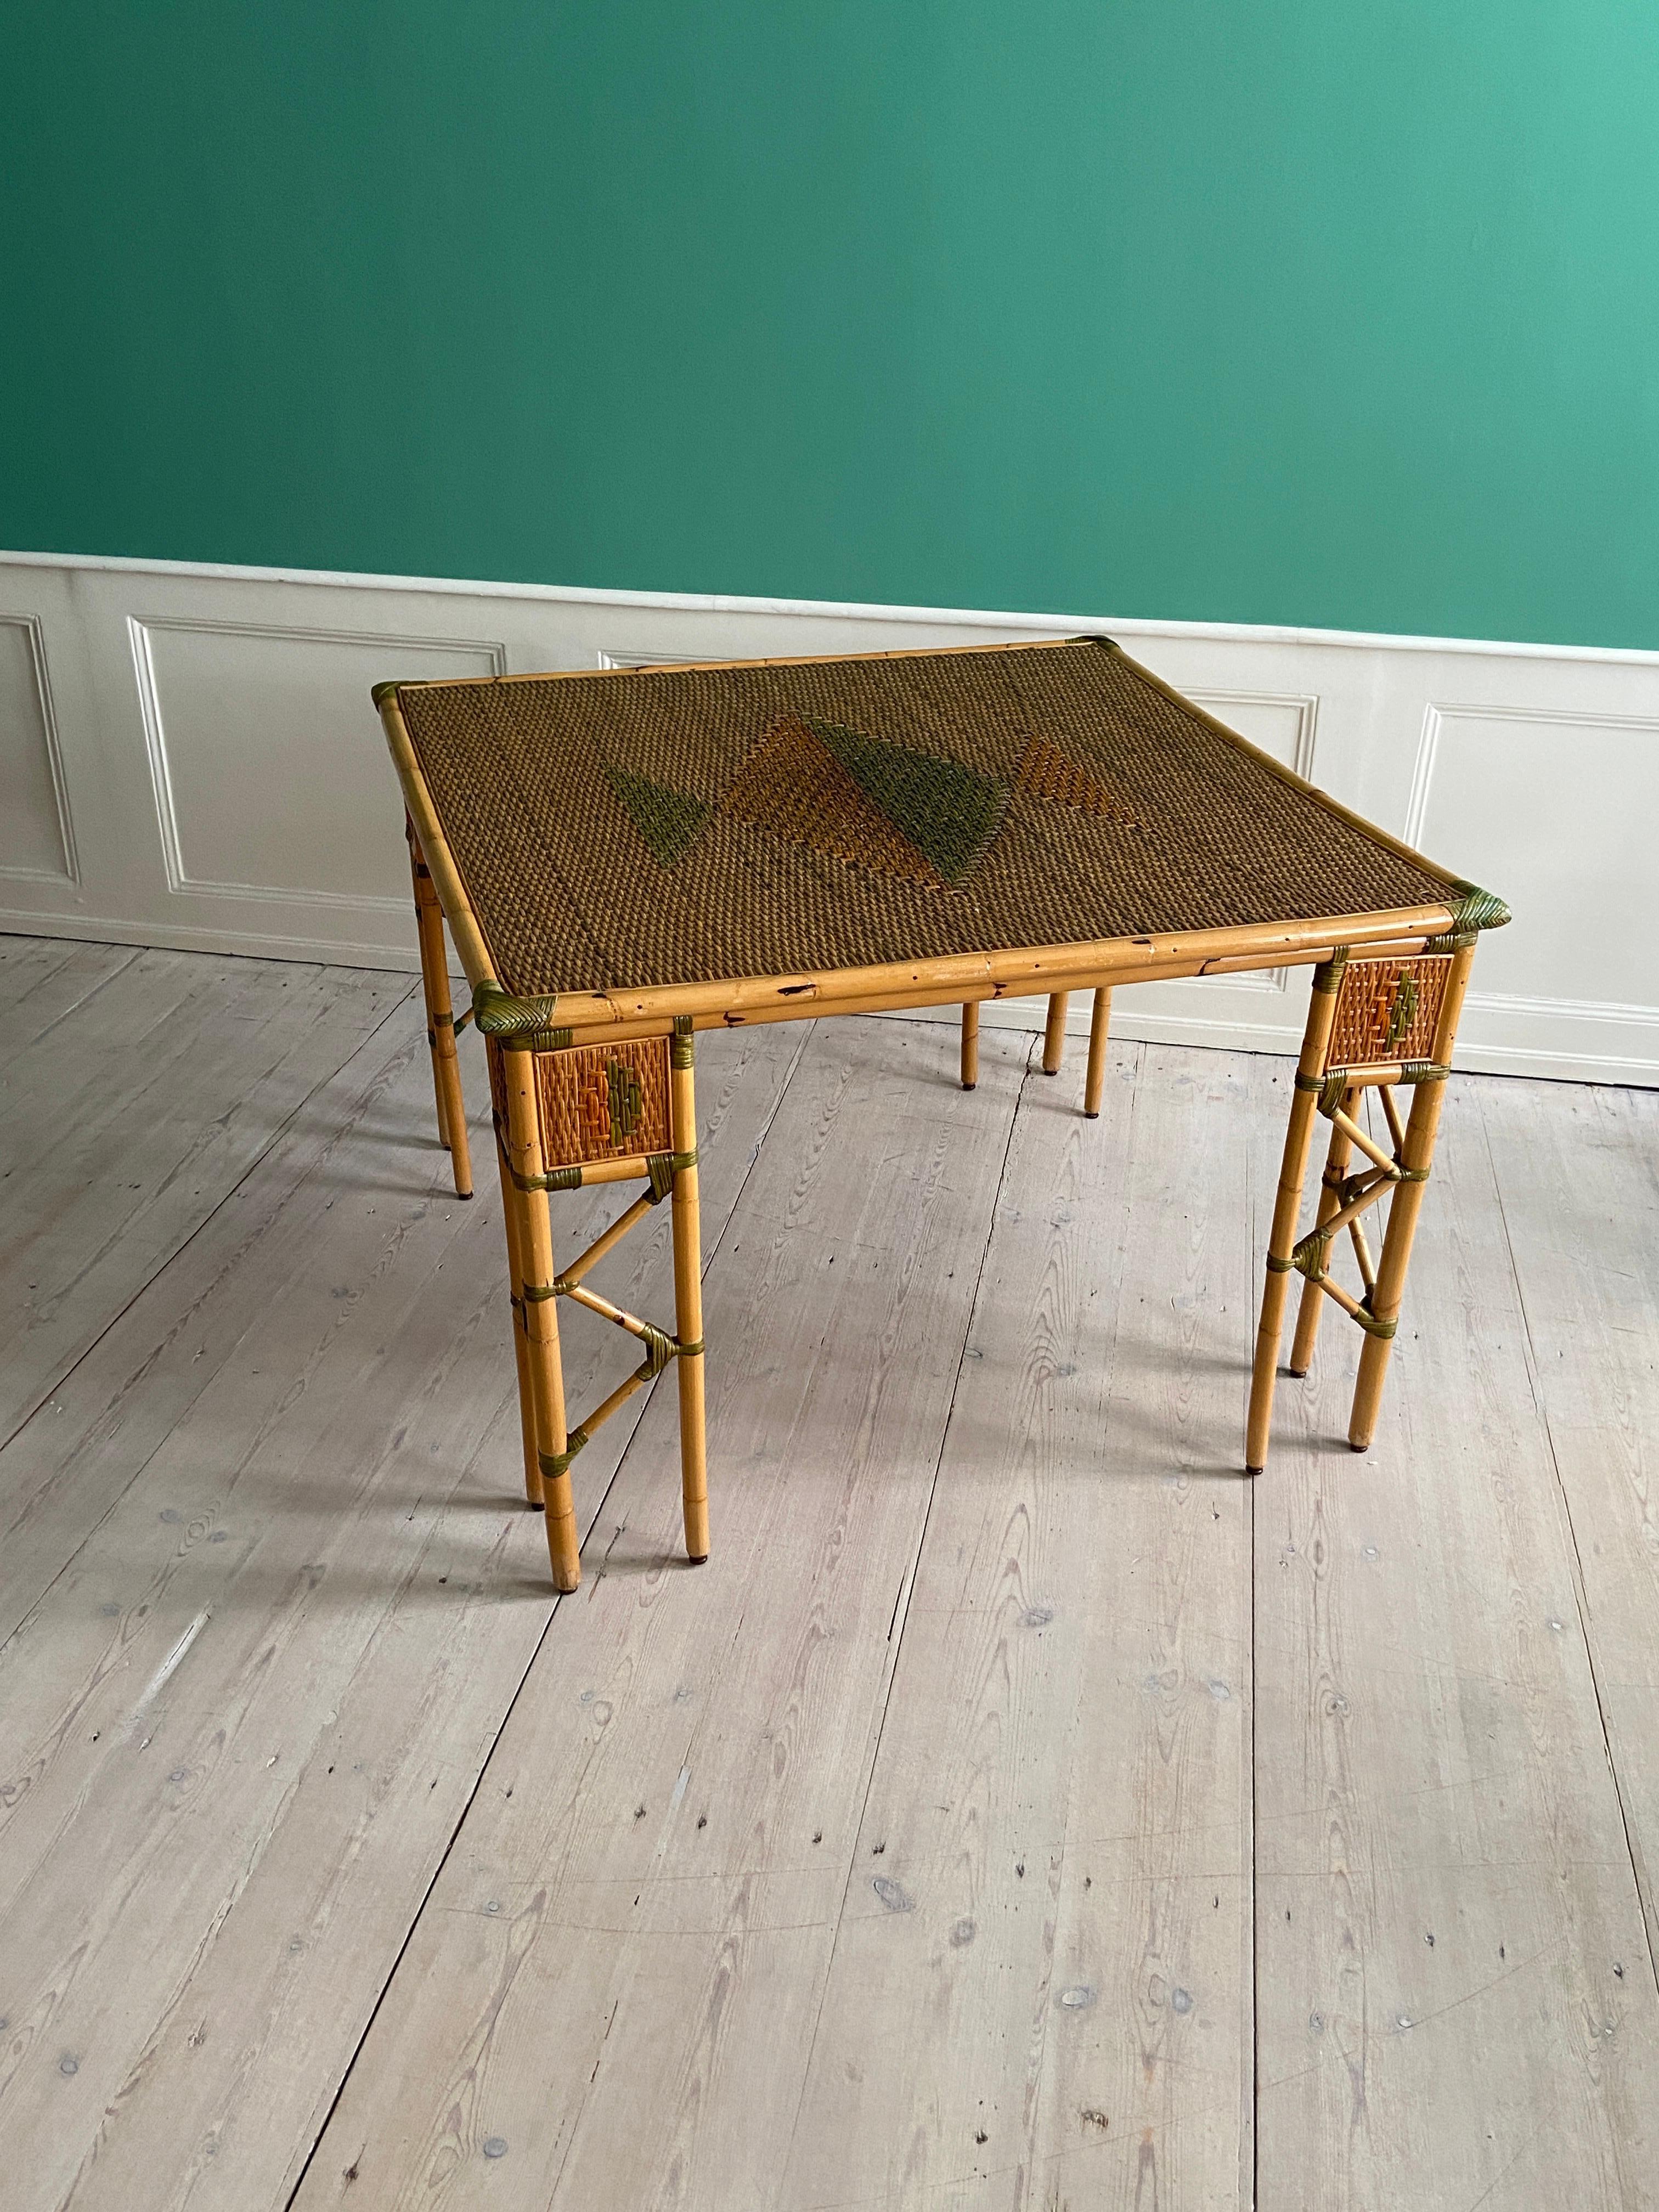 French Vintage Woven Bamboo Table with Brass Details, France, Early 20th Century For Sale